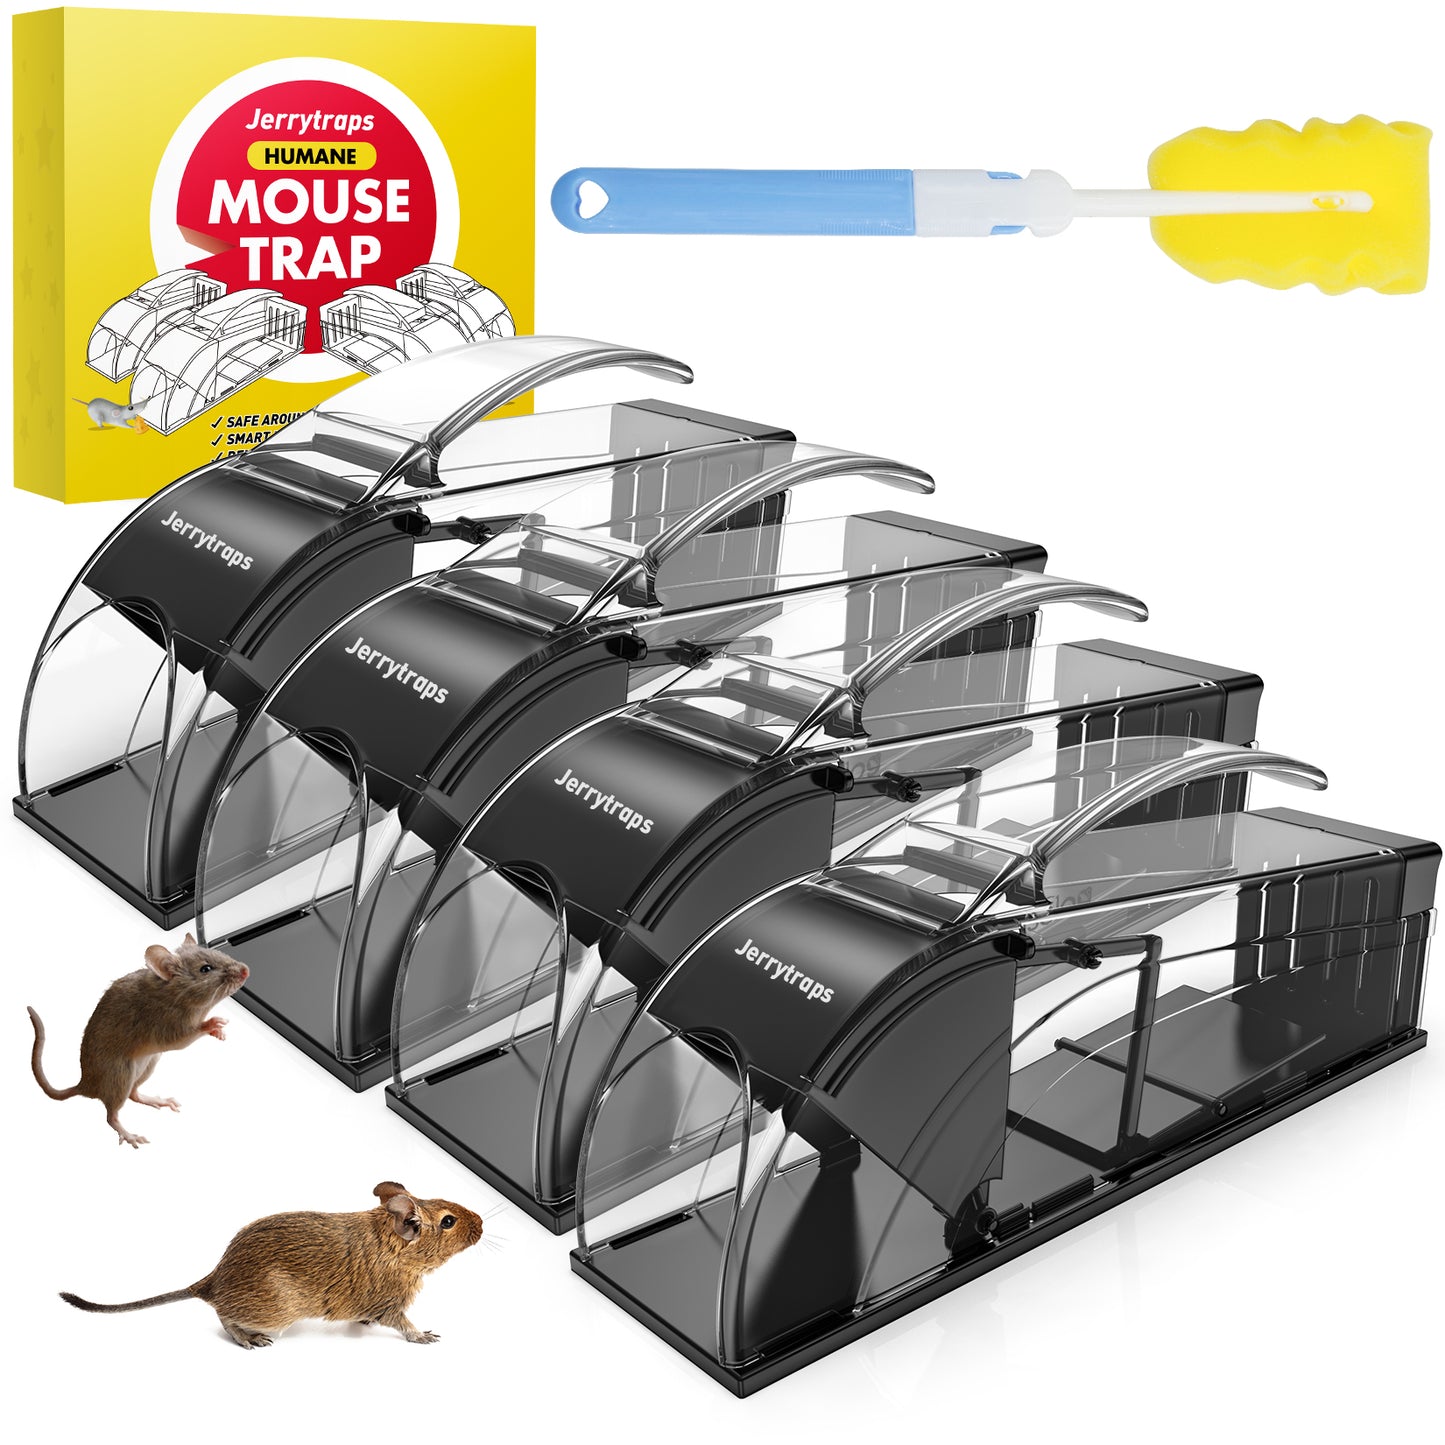 umane Mouse Trap No Kill,Catch and Release Indoor/Outdoor Mouse Traps for Mice,Easy to Set,Mouse Catcher Quick Effective Reusable and Safe for Families Black 4PCS